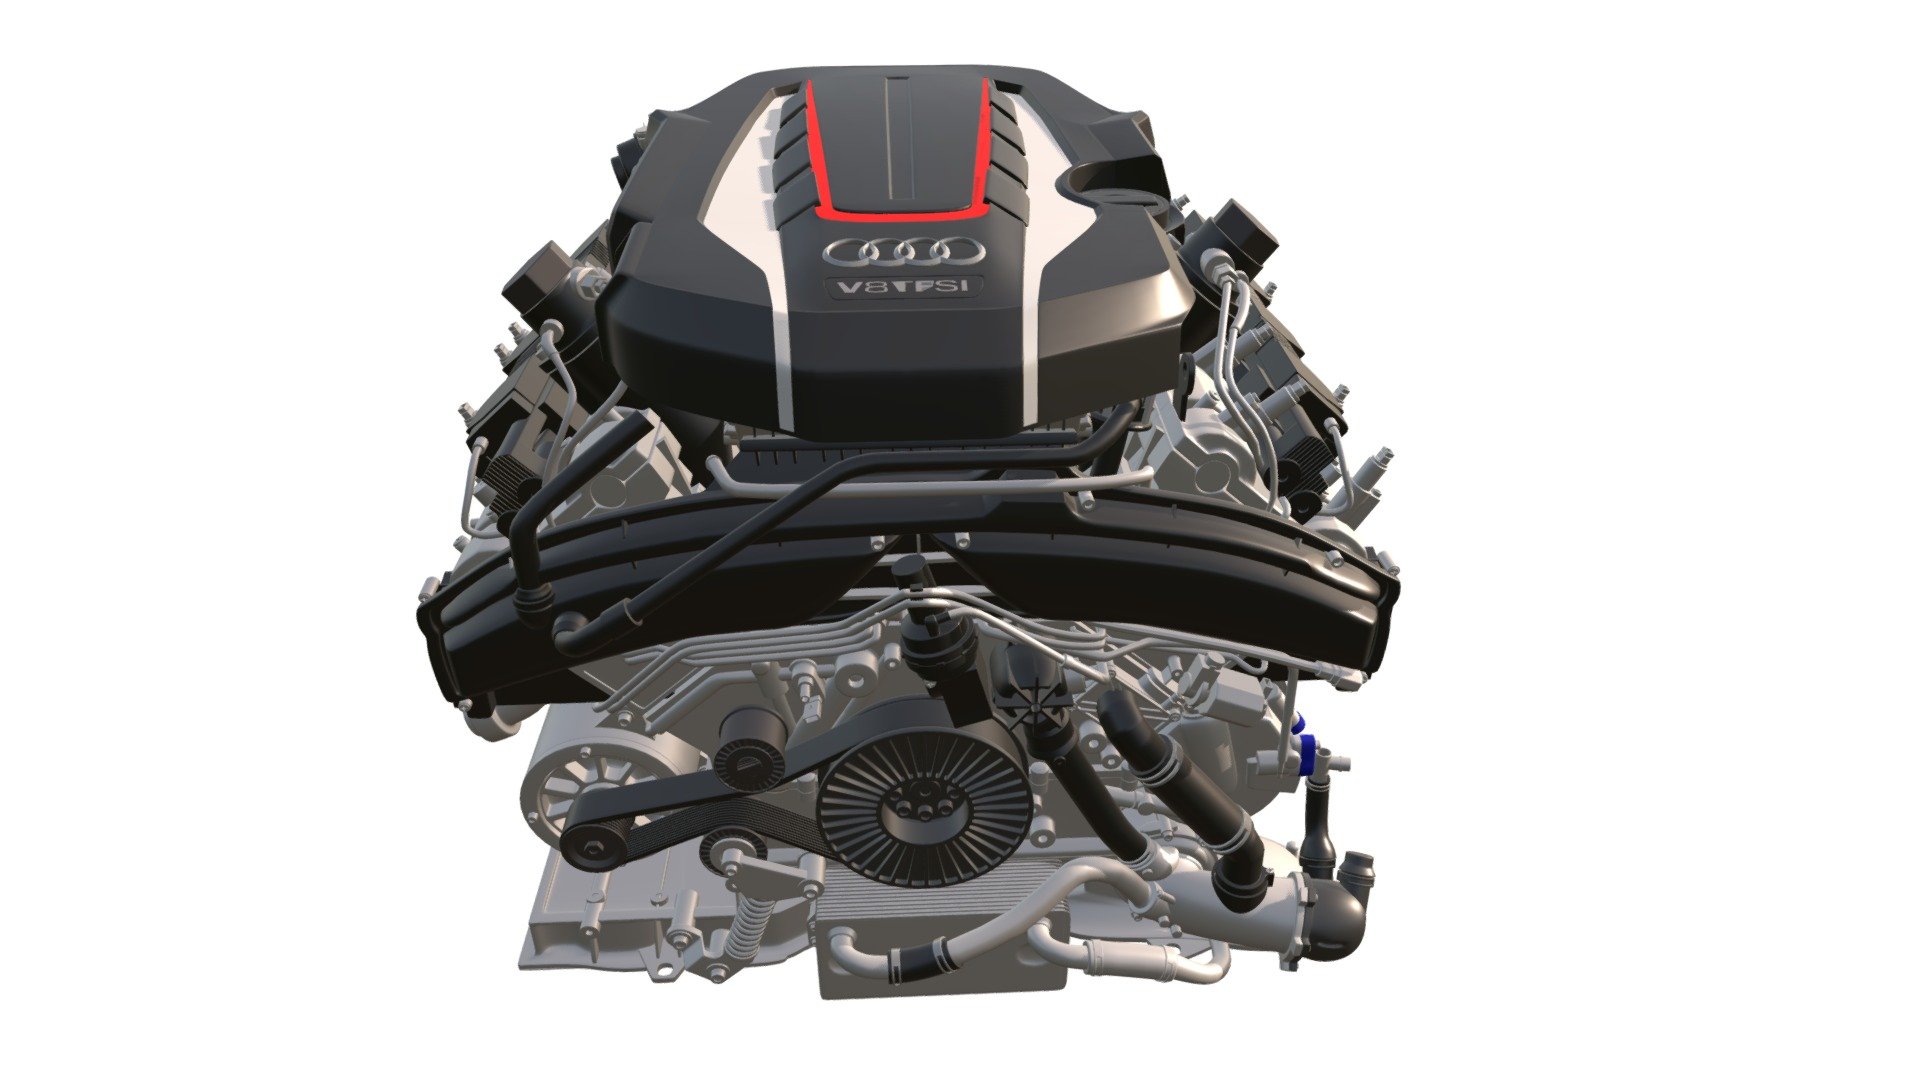 Quality 3d model of Audi S8 TFSI V8 Engine.

If you need other 3d formats, please contact us 3d model